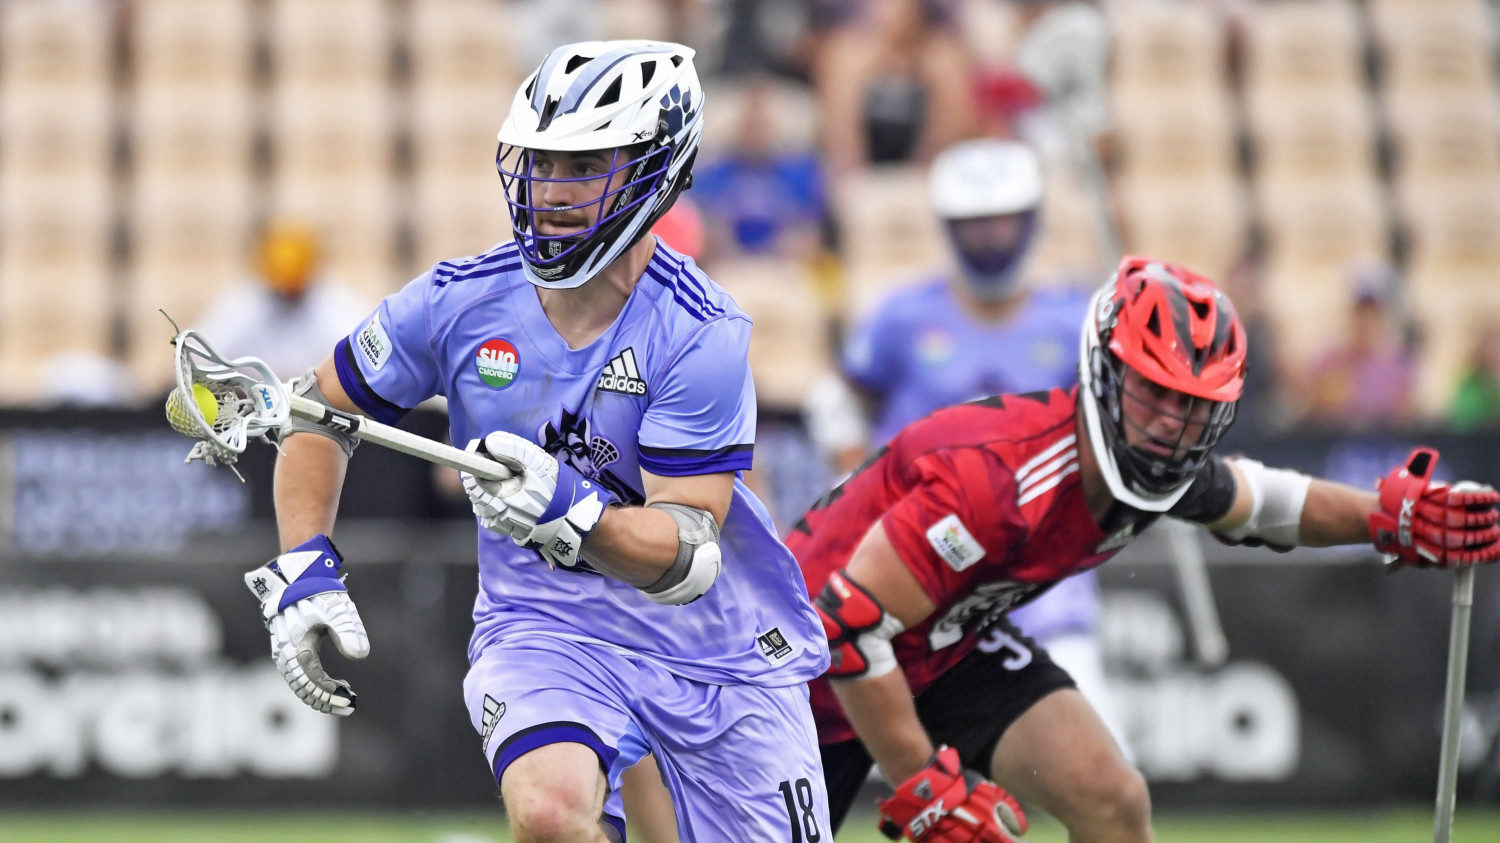 Premier Lacrosse League aims for mainstream audience with touring model